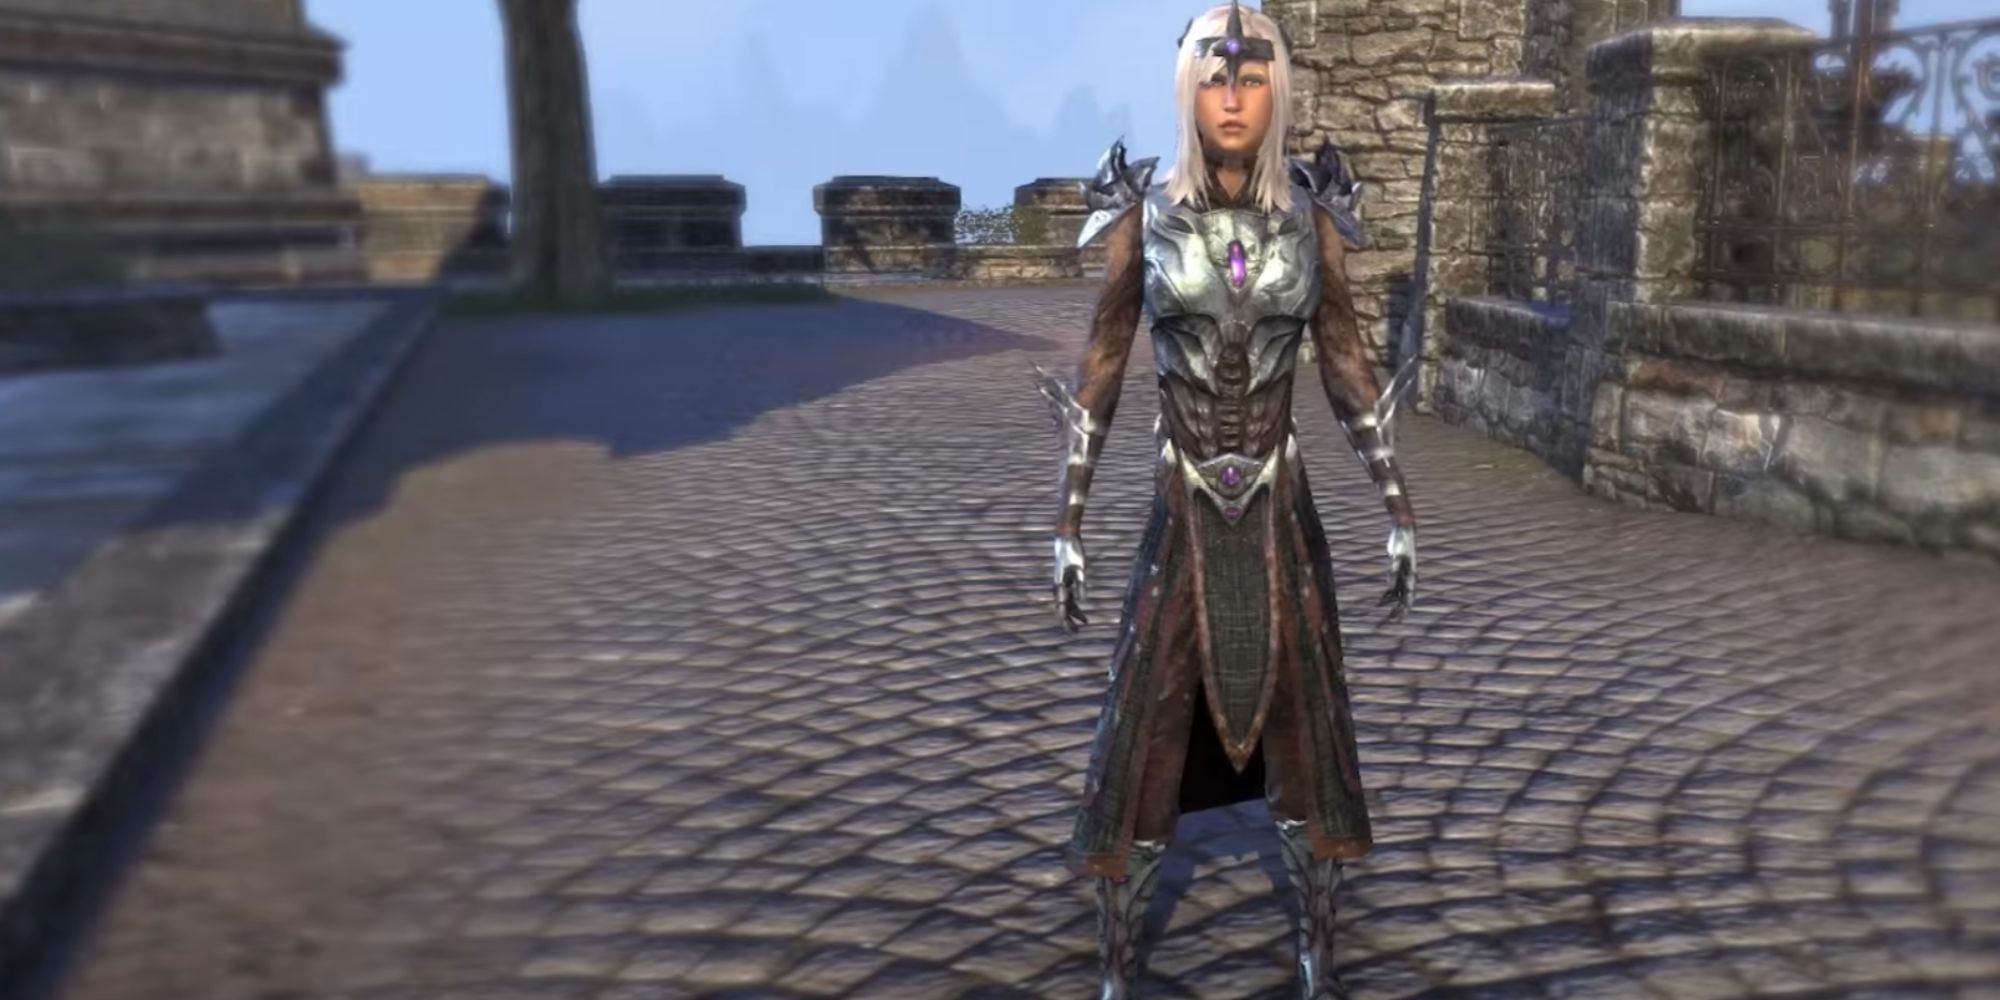 ESO Character Wearing The Mannimarco Outfit